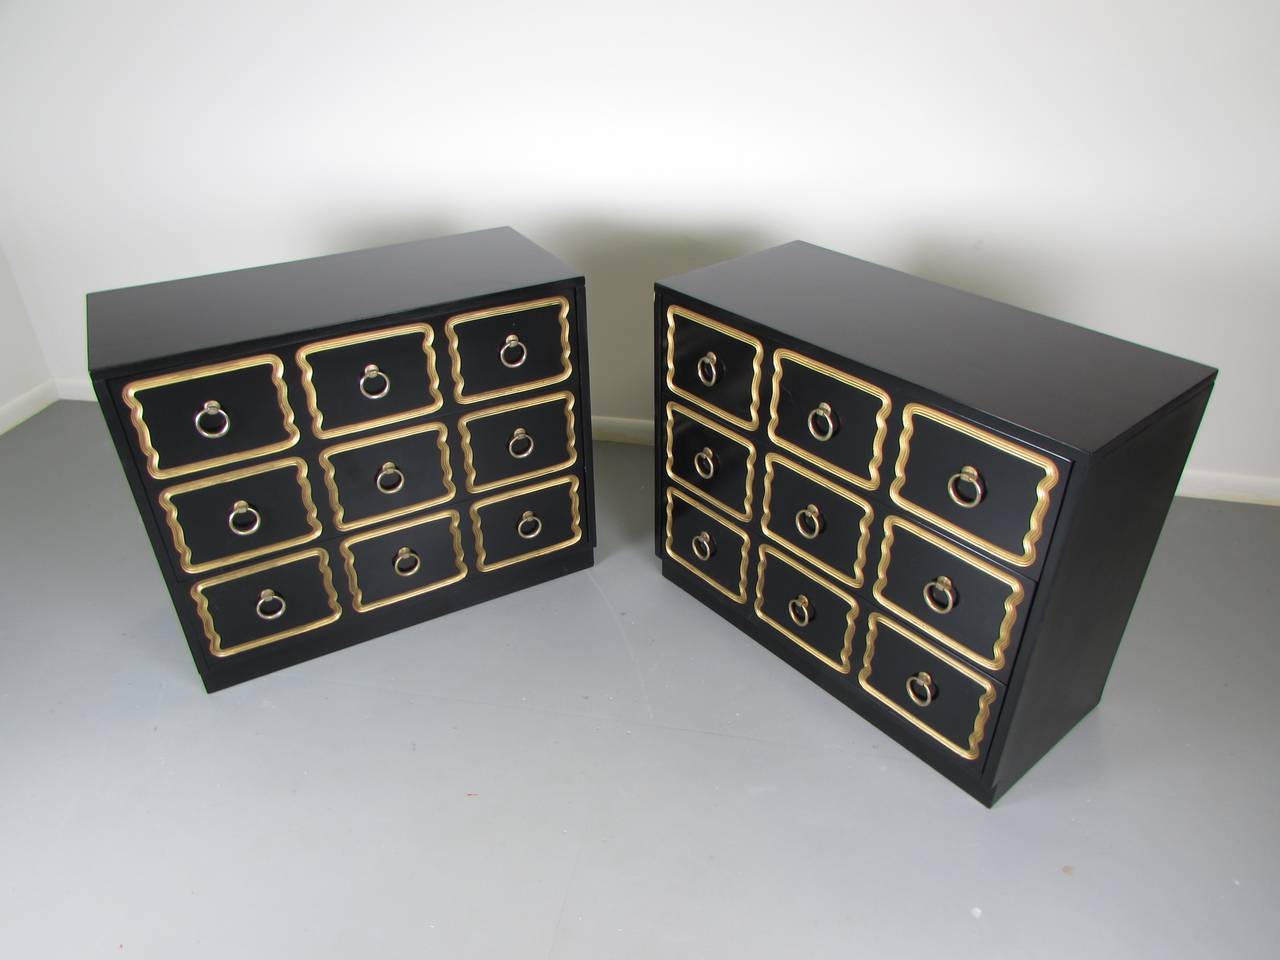 Pair of glamorous Espana chests in black lacquer by Dorothy Draper, 1950s. This pair has been freshly restored in a new black lacquer finish with gold trim. The patinated brass hardware was left in it's original condition. 

We offer free regular